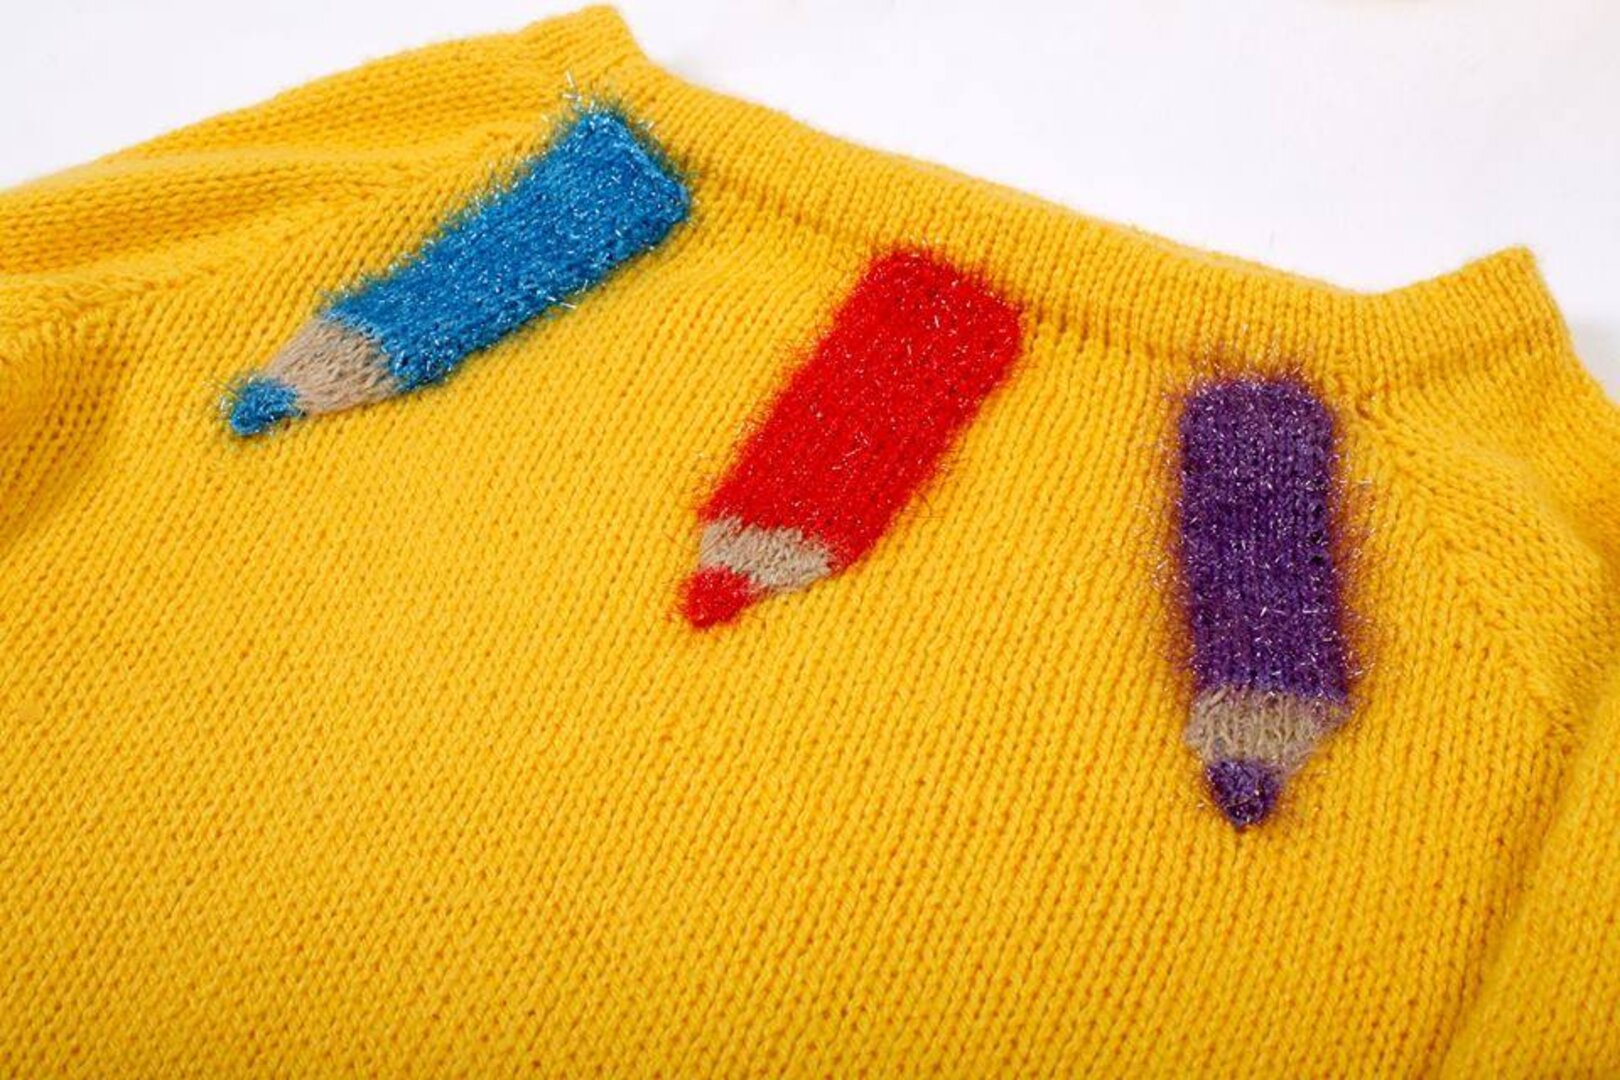 KNITTED YELLOW SWEATER WITH PENCILS